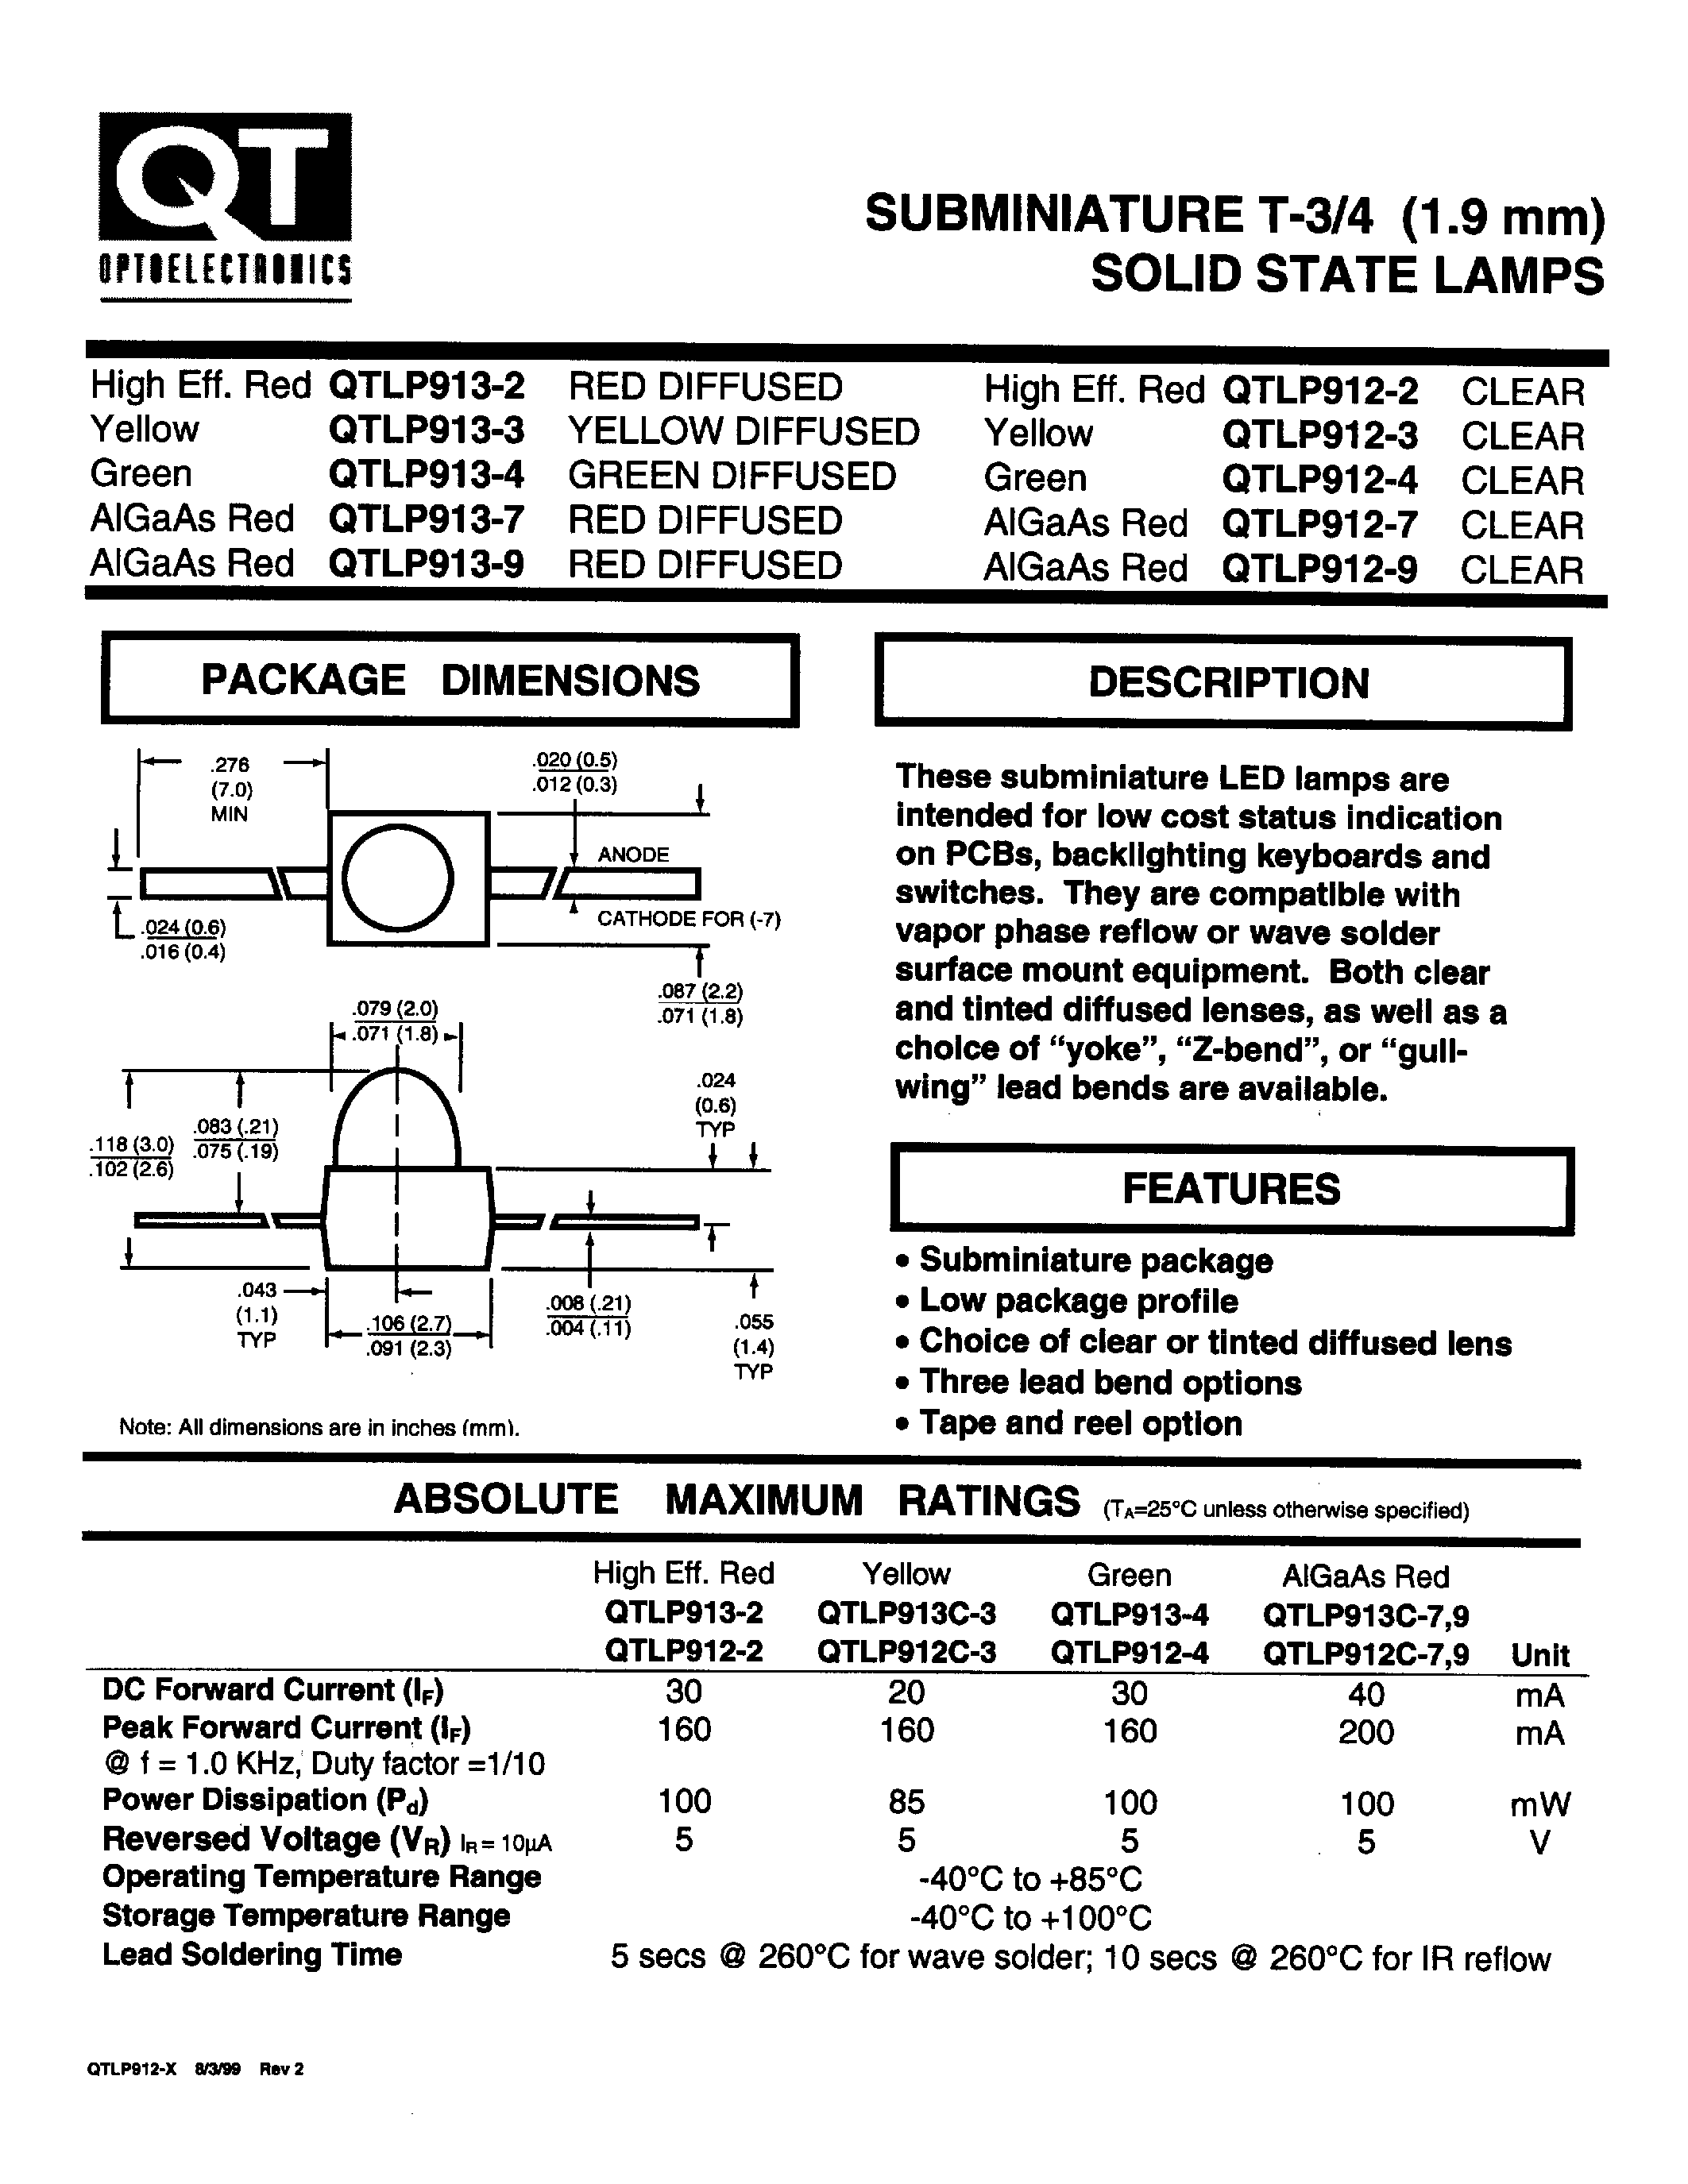 Даташит QTLP912-9 - SUBMINIATURE T-3/4 (1.9 mm) SOLID STATE LAMPS страница 1